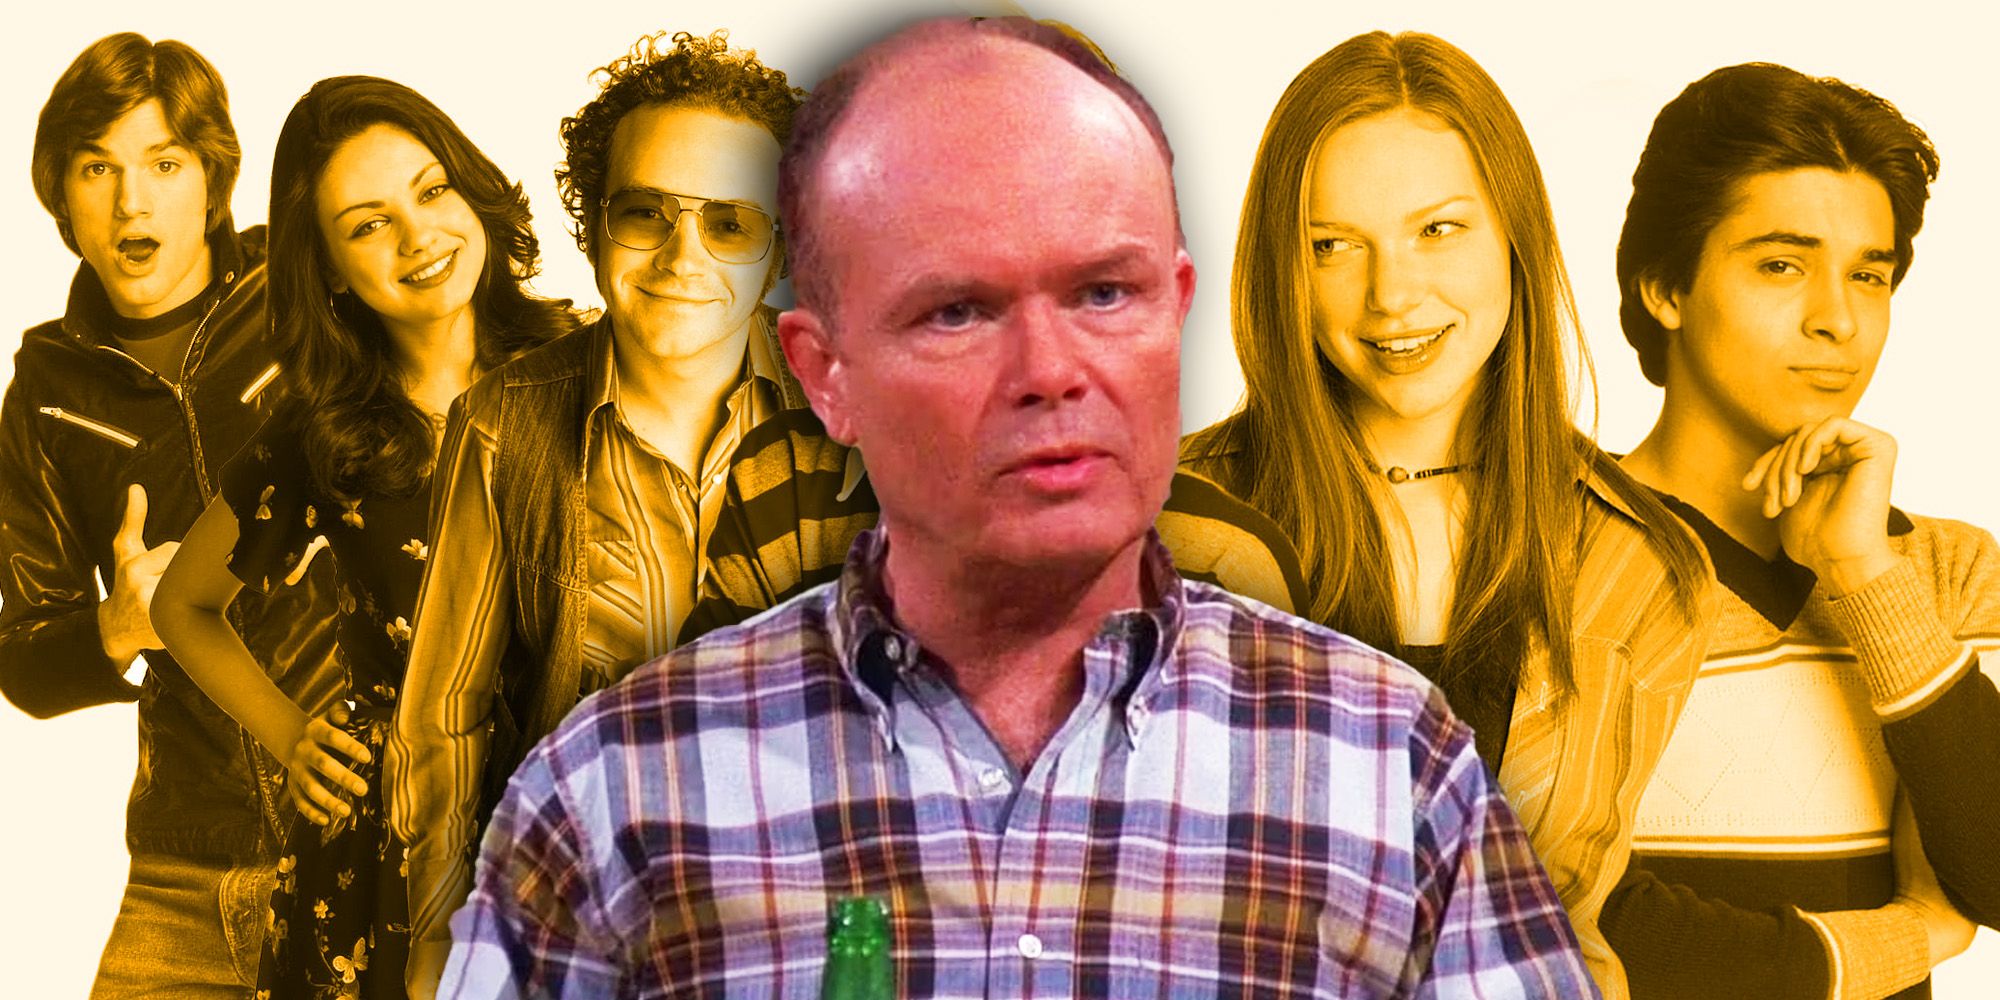 Red Forman in center over young cast of That '70s Show